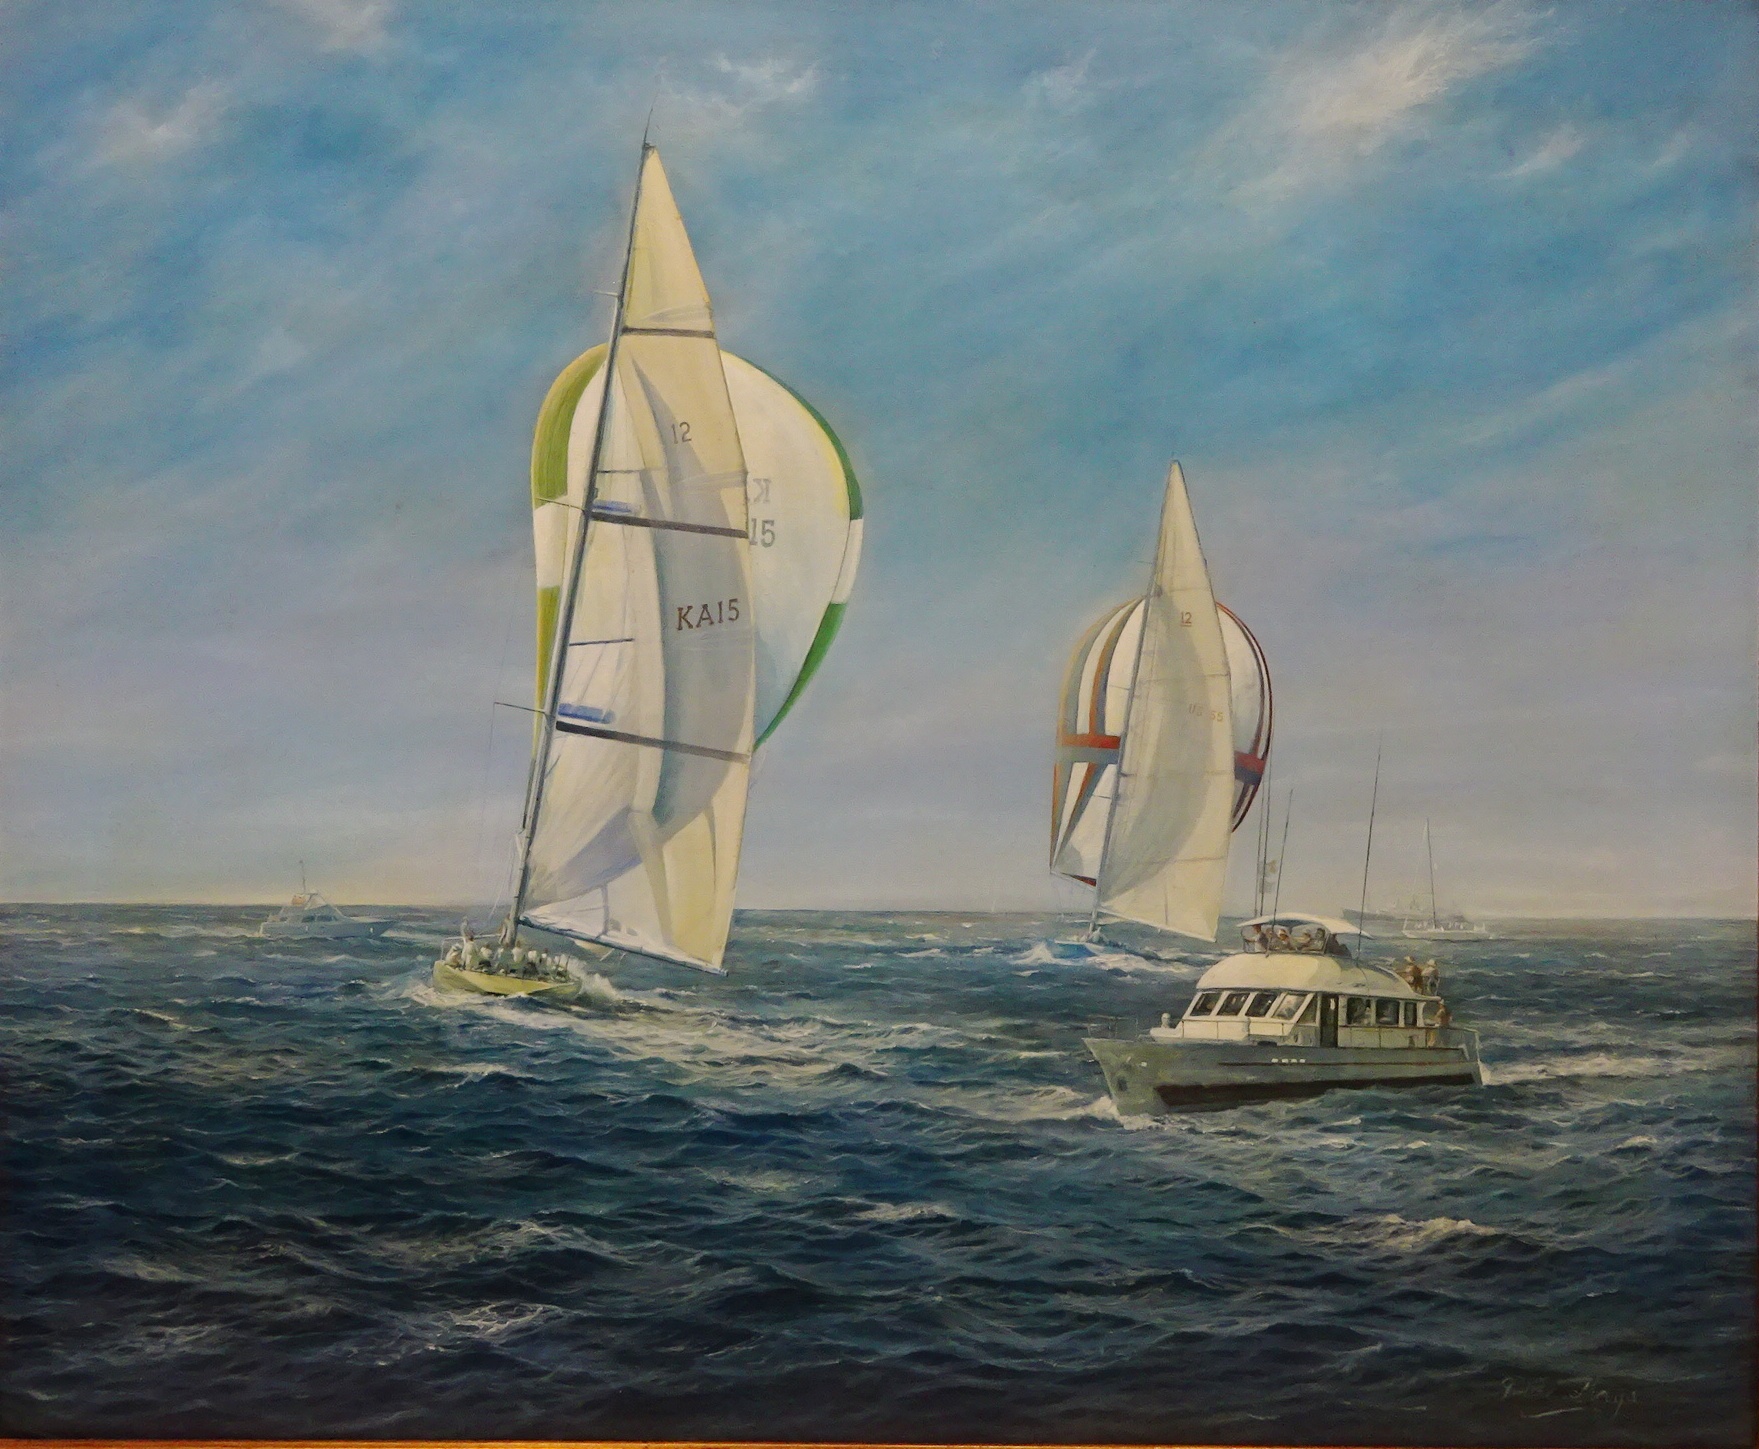 Brian Mays (British 1935-): Yachting - 'USA regains the Americas Cup in 1987' - Stars and Stripes